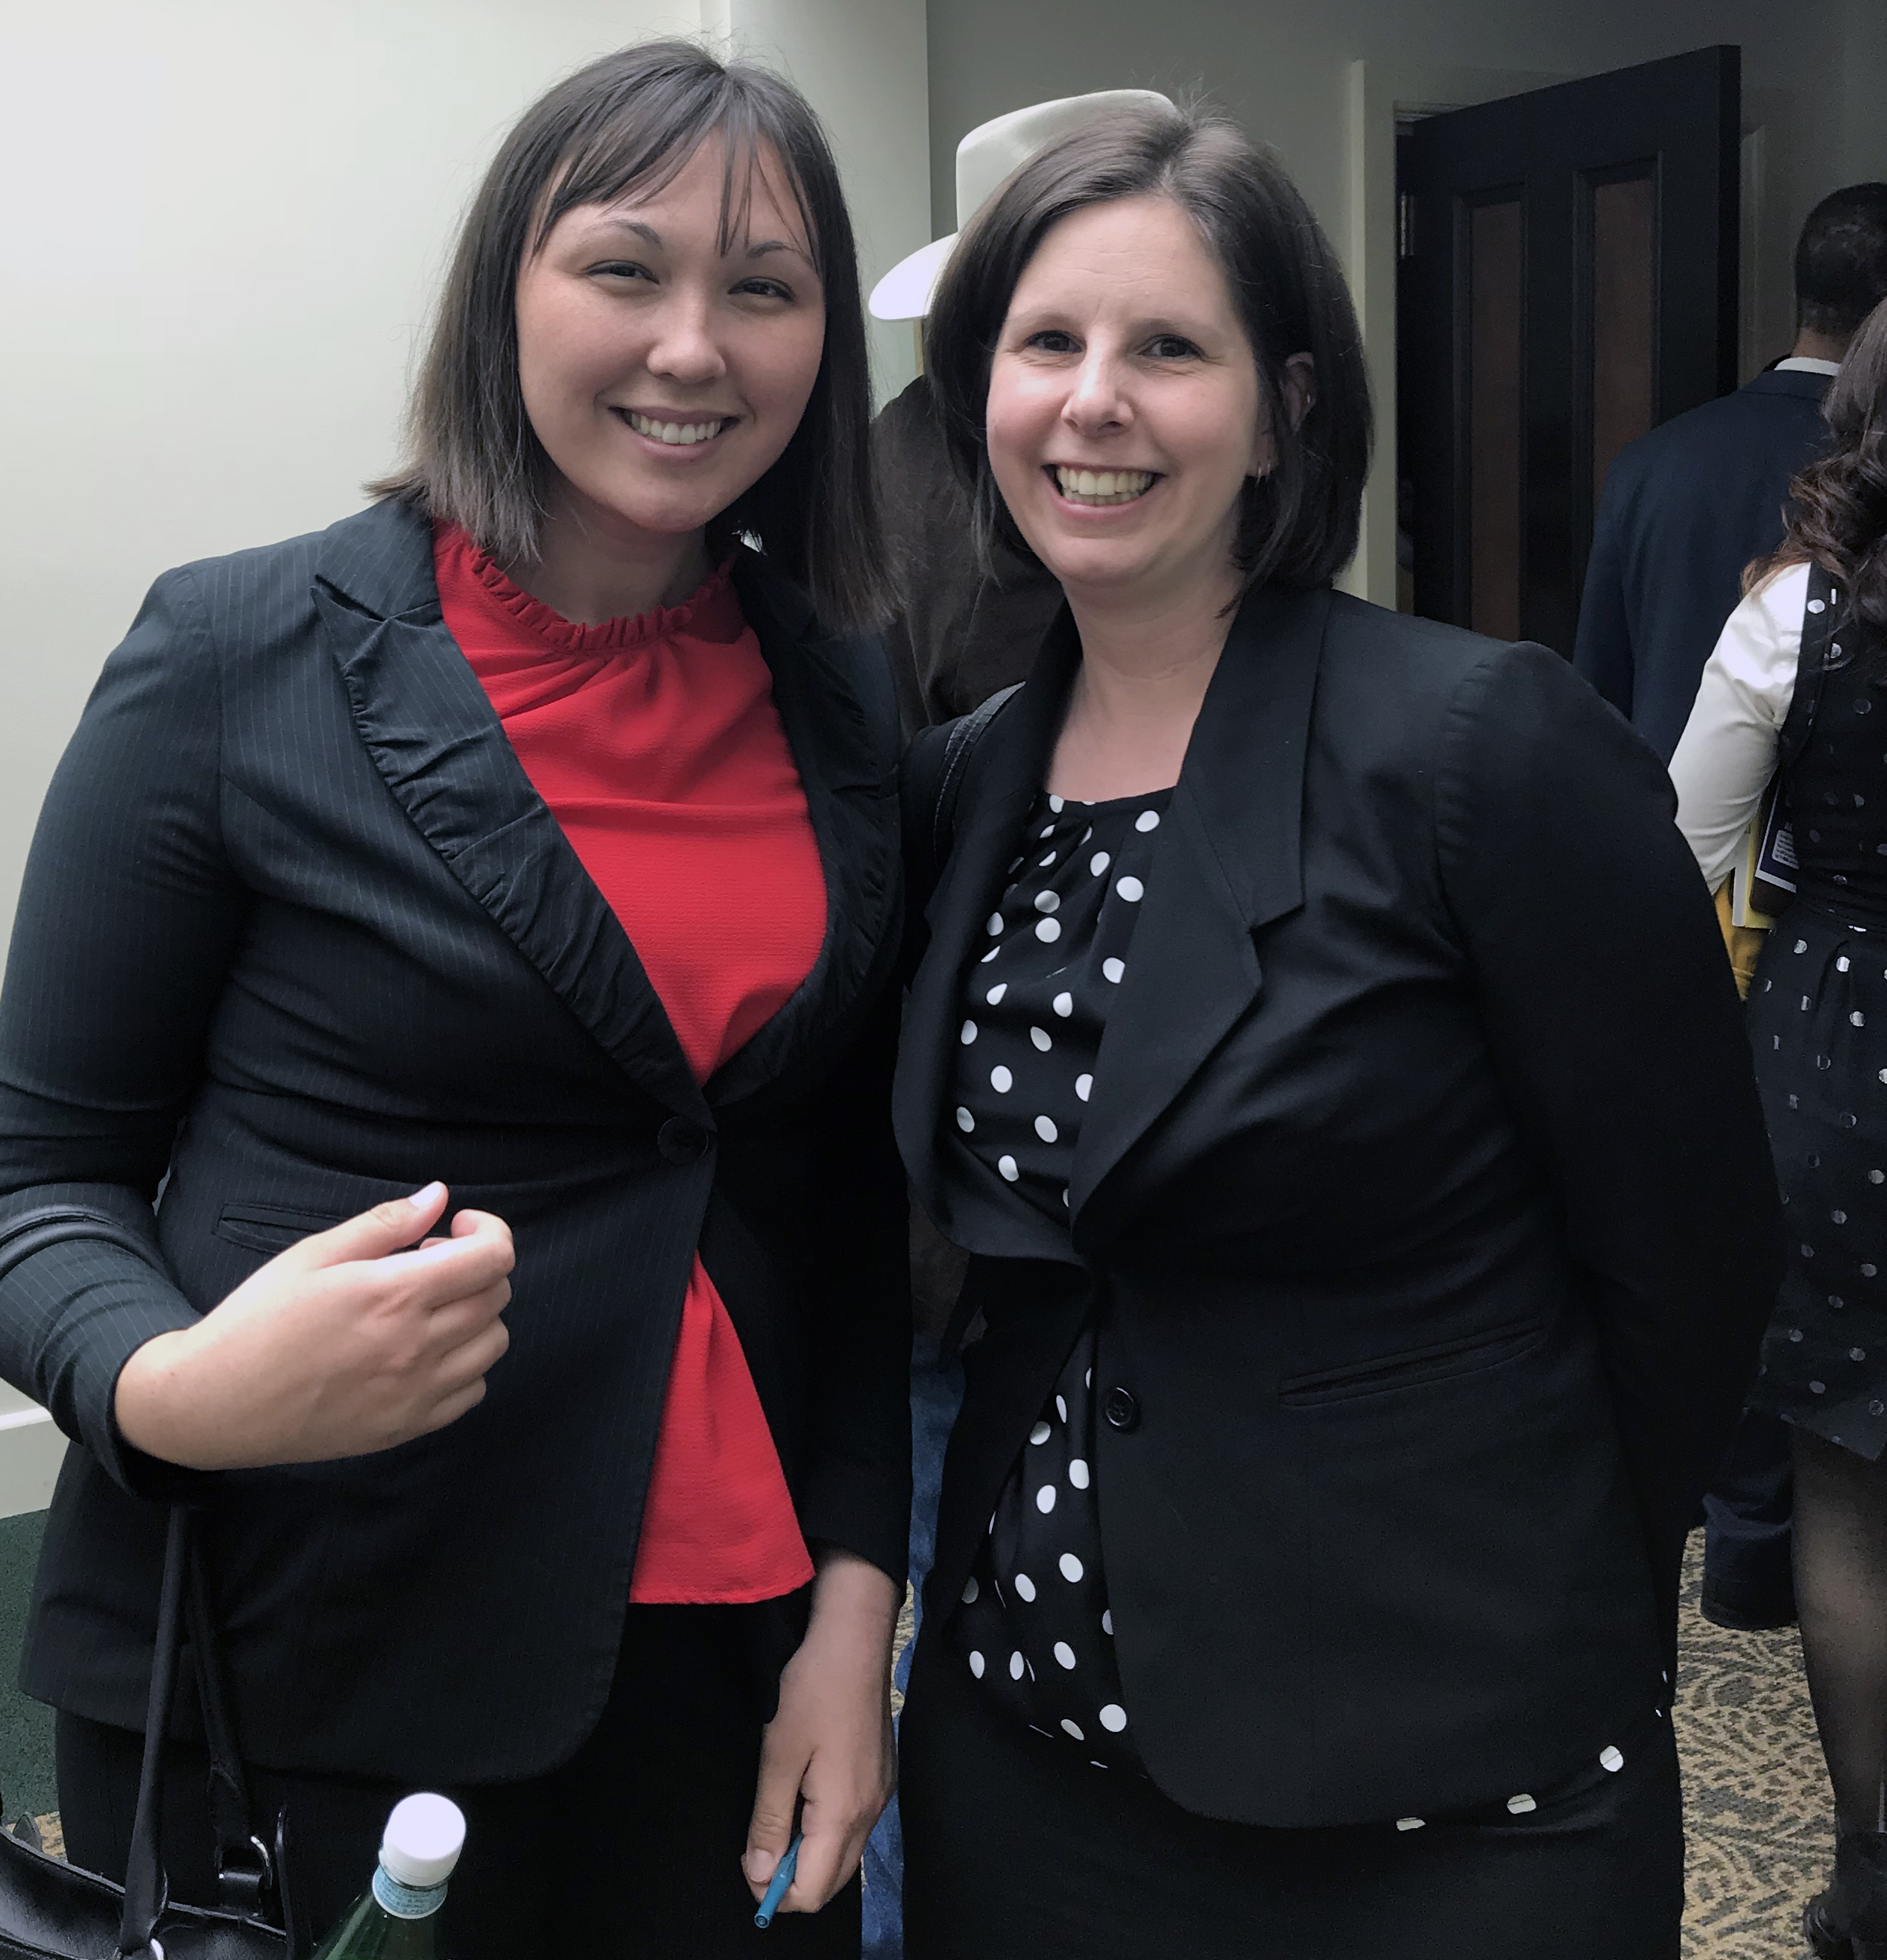 Katie Fiester (LAAW) and Daniela Urban (CWR) after the hearing.